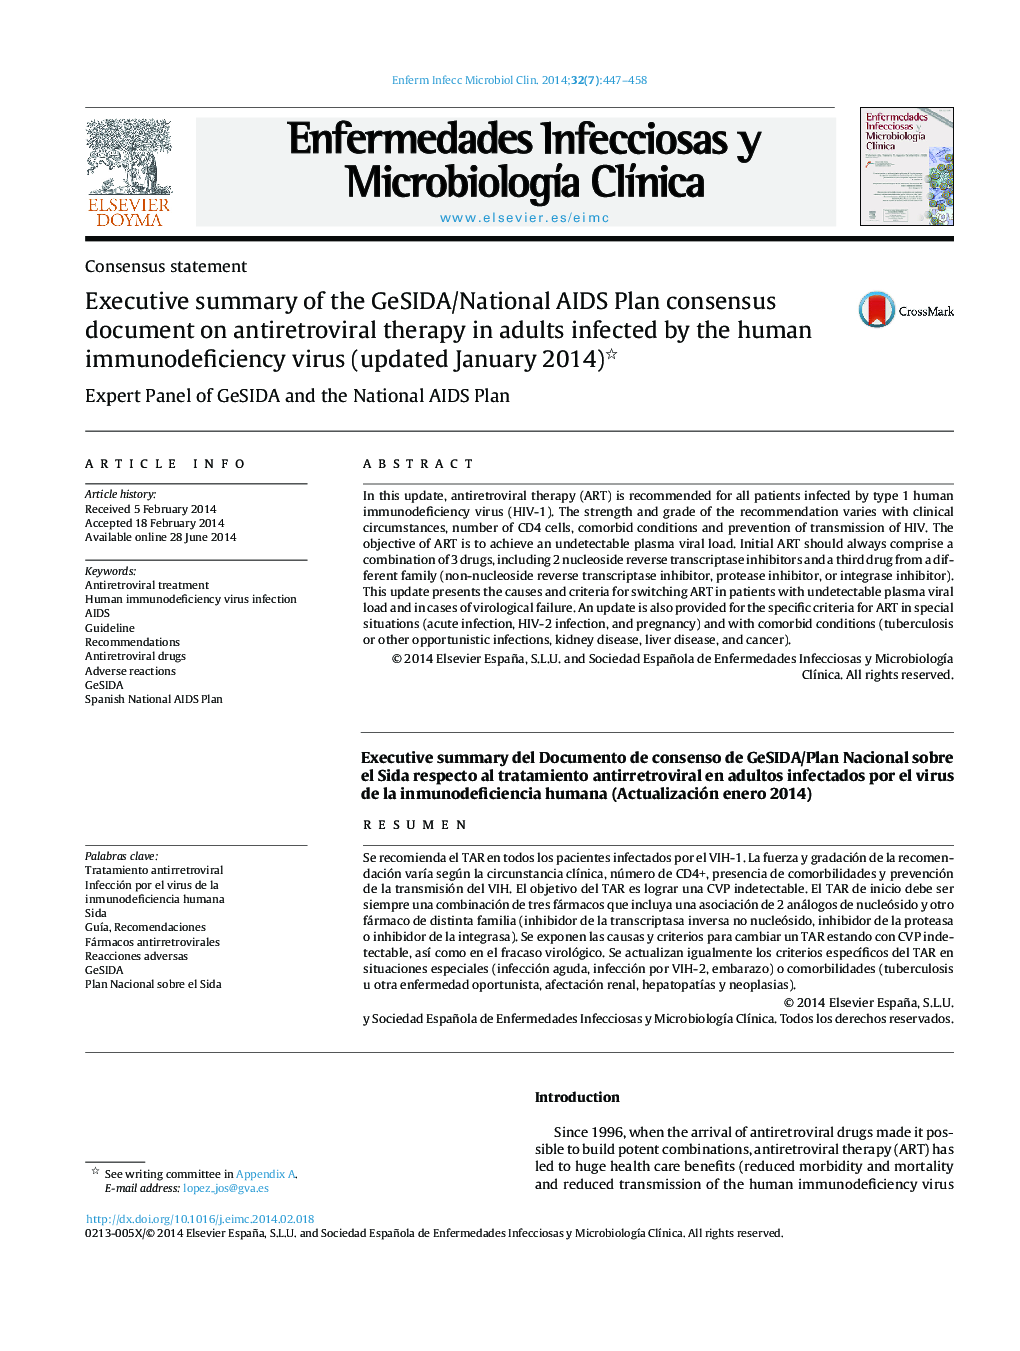 Executive summary of the GeSIDA/National AIDS Plan consensus document on antiretroviral therapy in adults infected by the human immunodeficiency virus (updated January 2014)